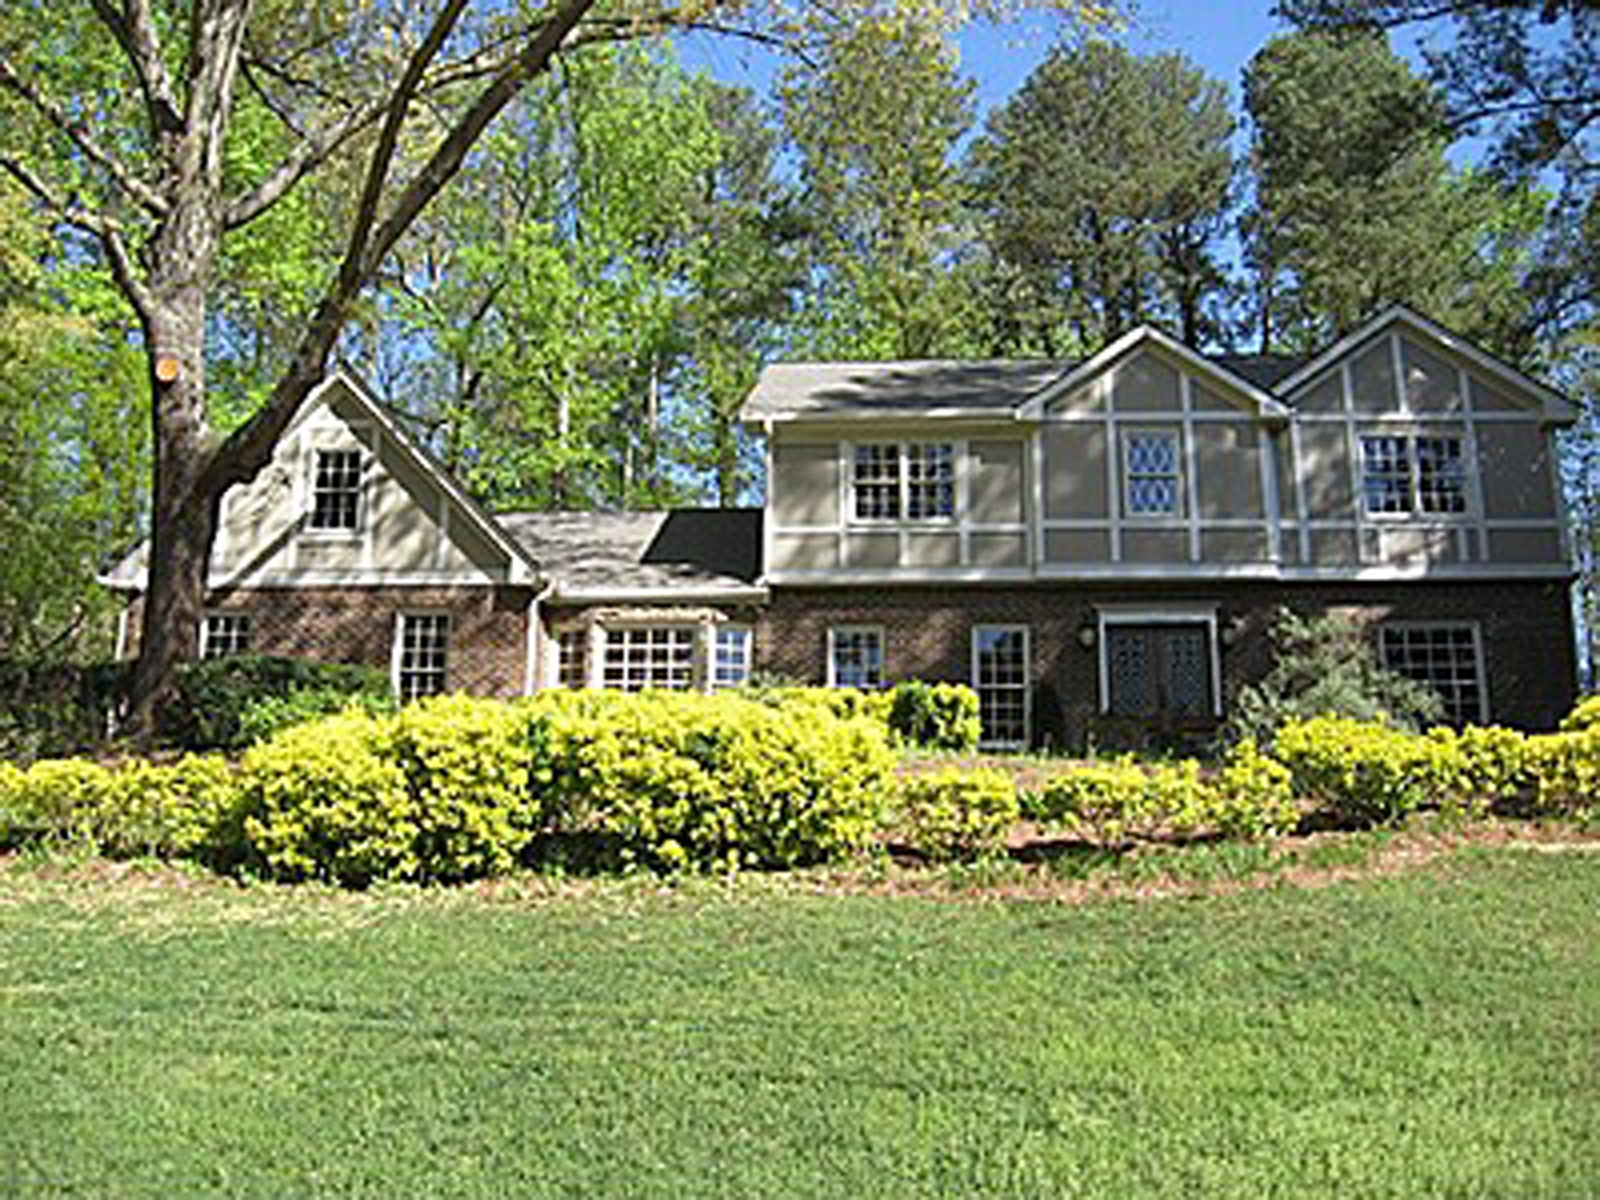 6310 Mountain Brook Ln Sandy Springs GA 30328 – Reduced to $575,000 – OFF MARKET